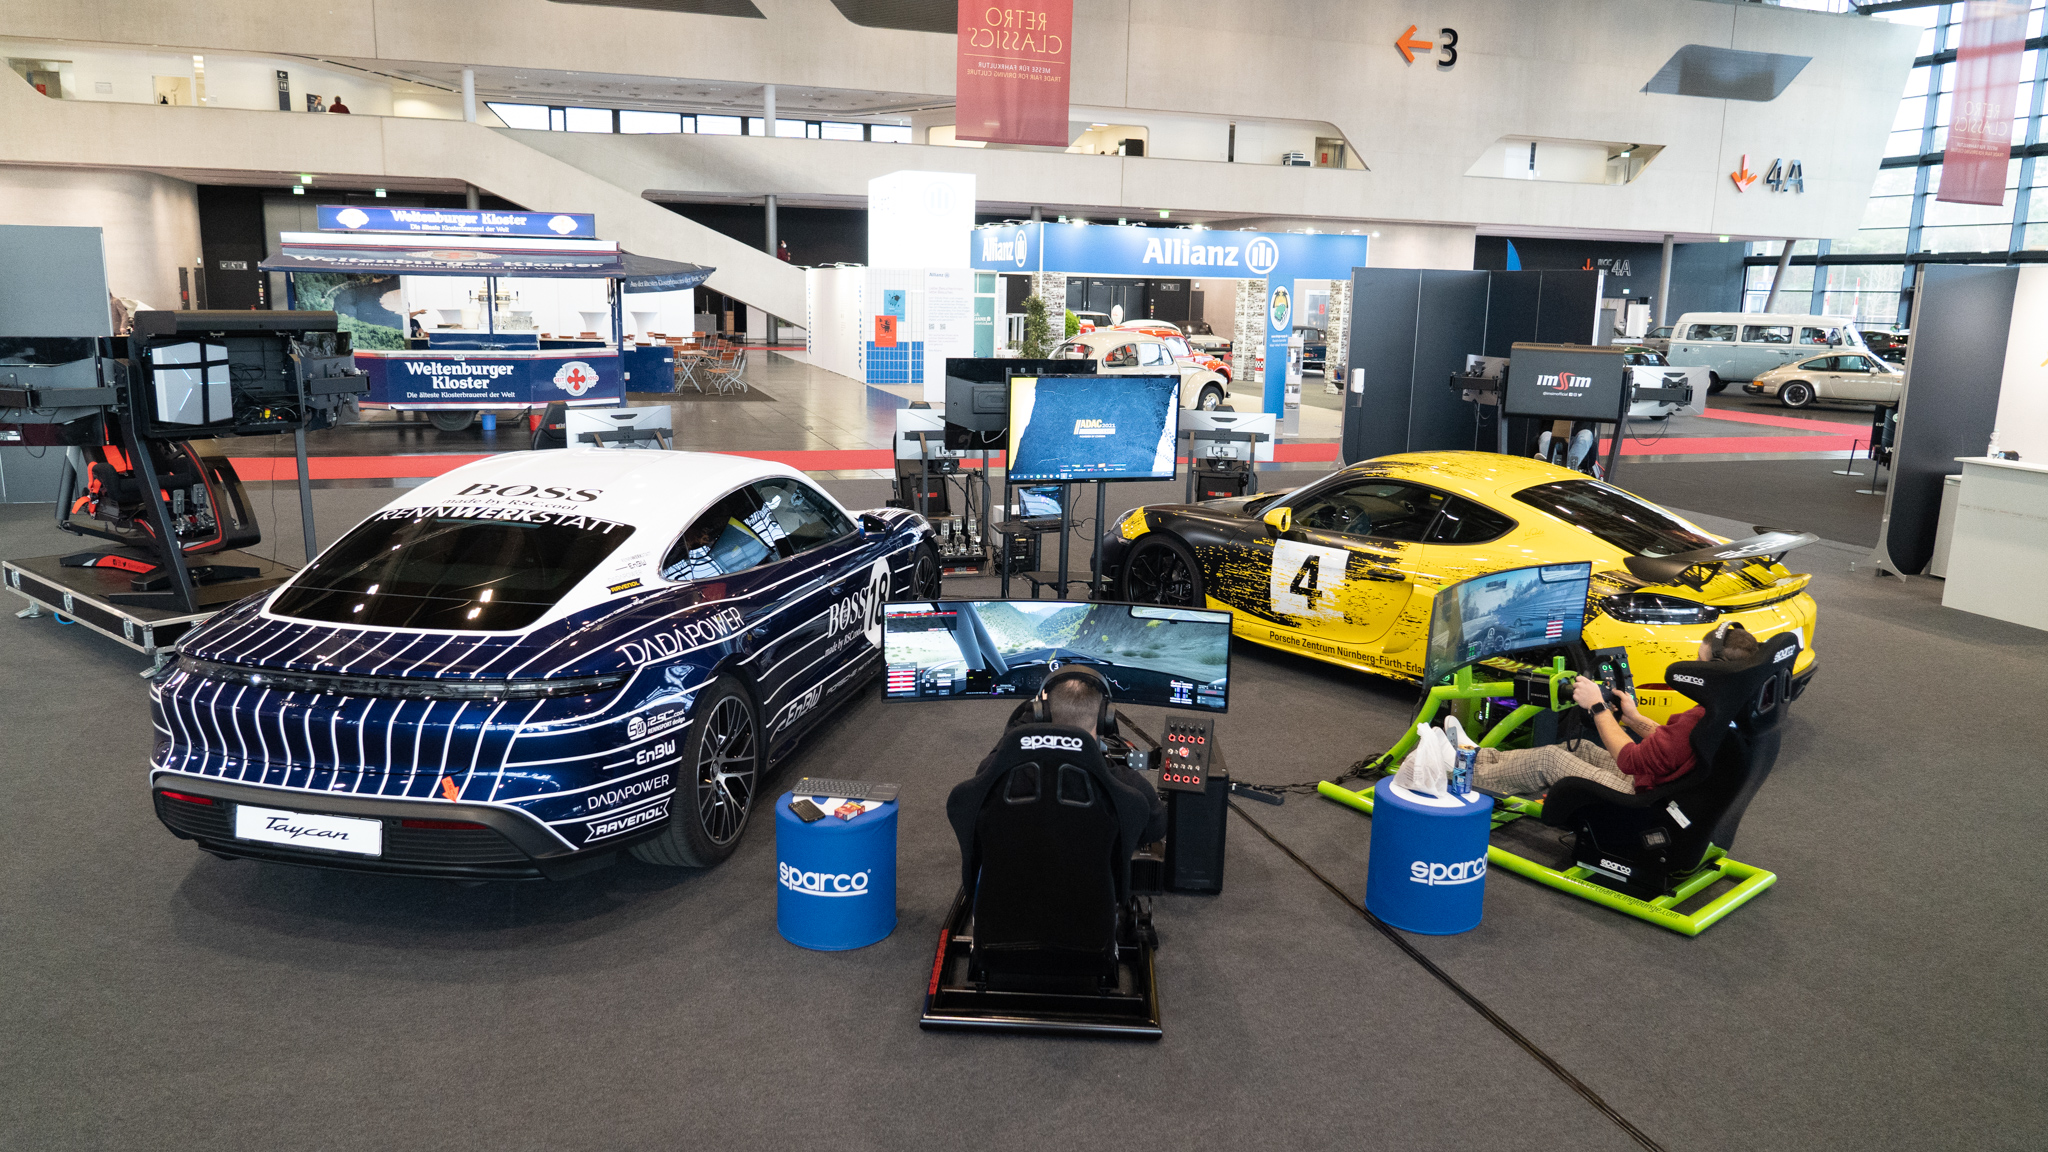 2023 ADAC SimRacing Expo: Our Highlights